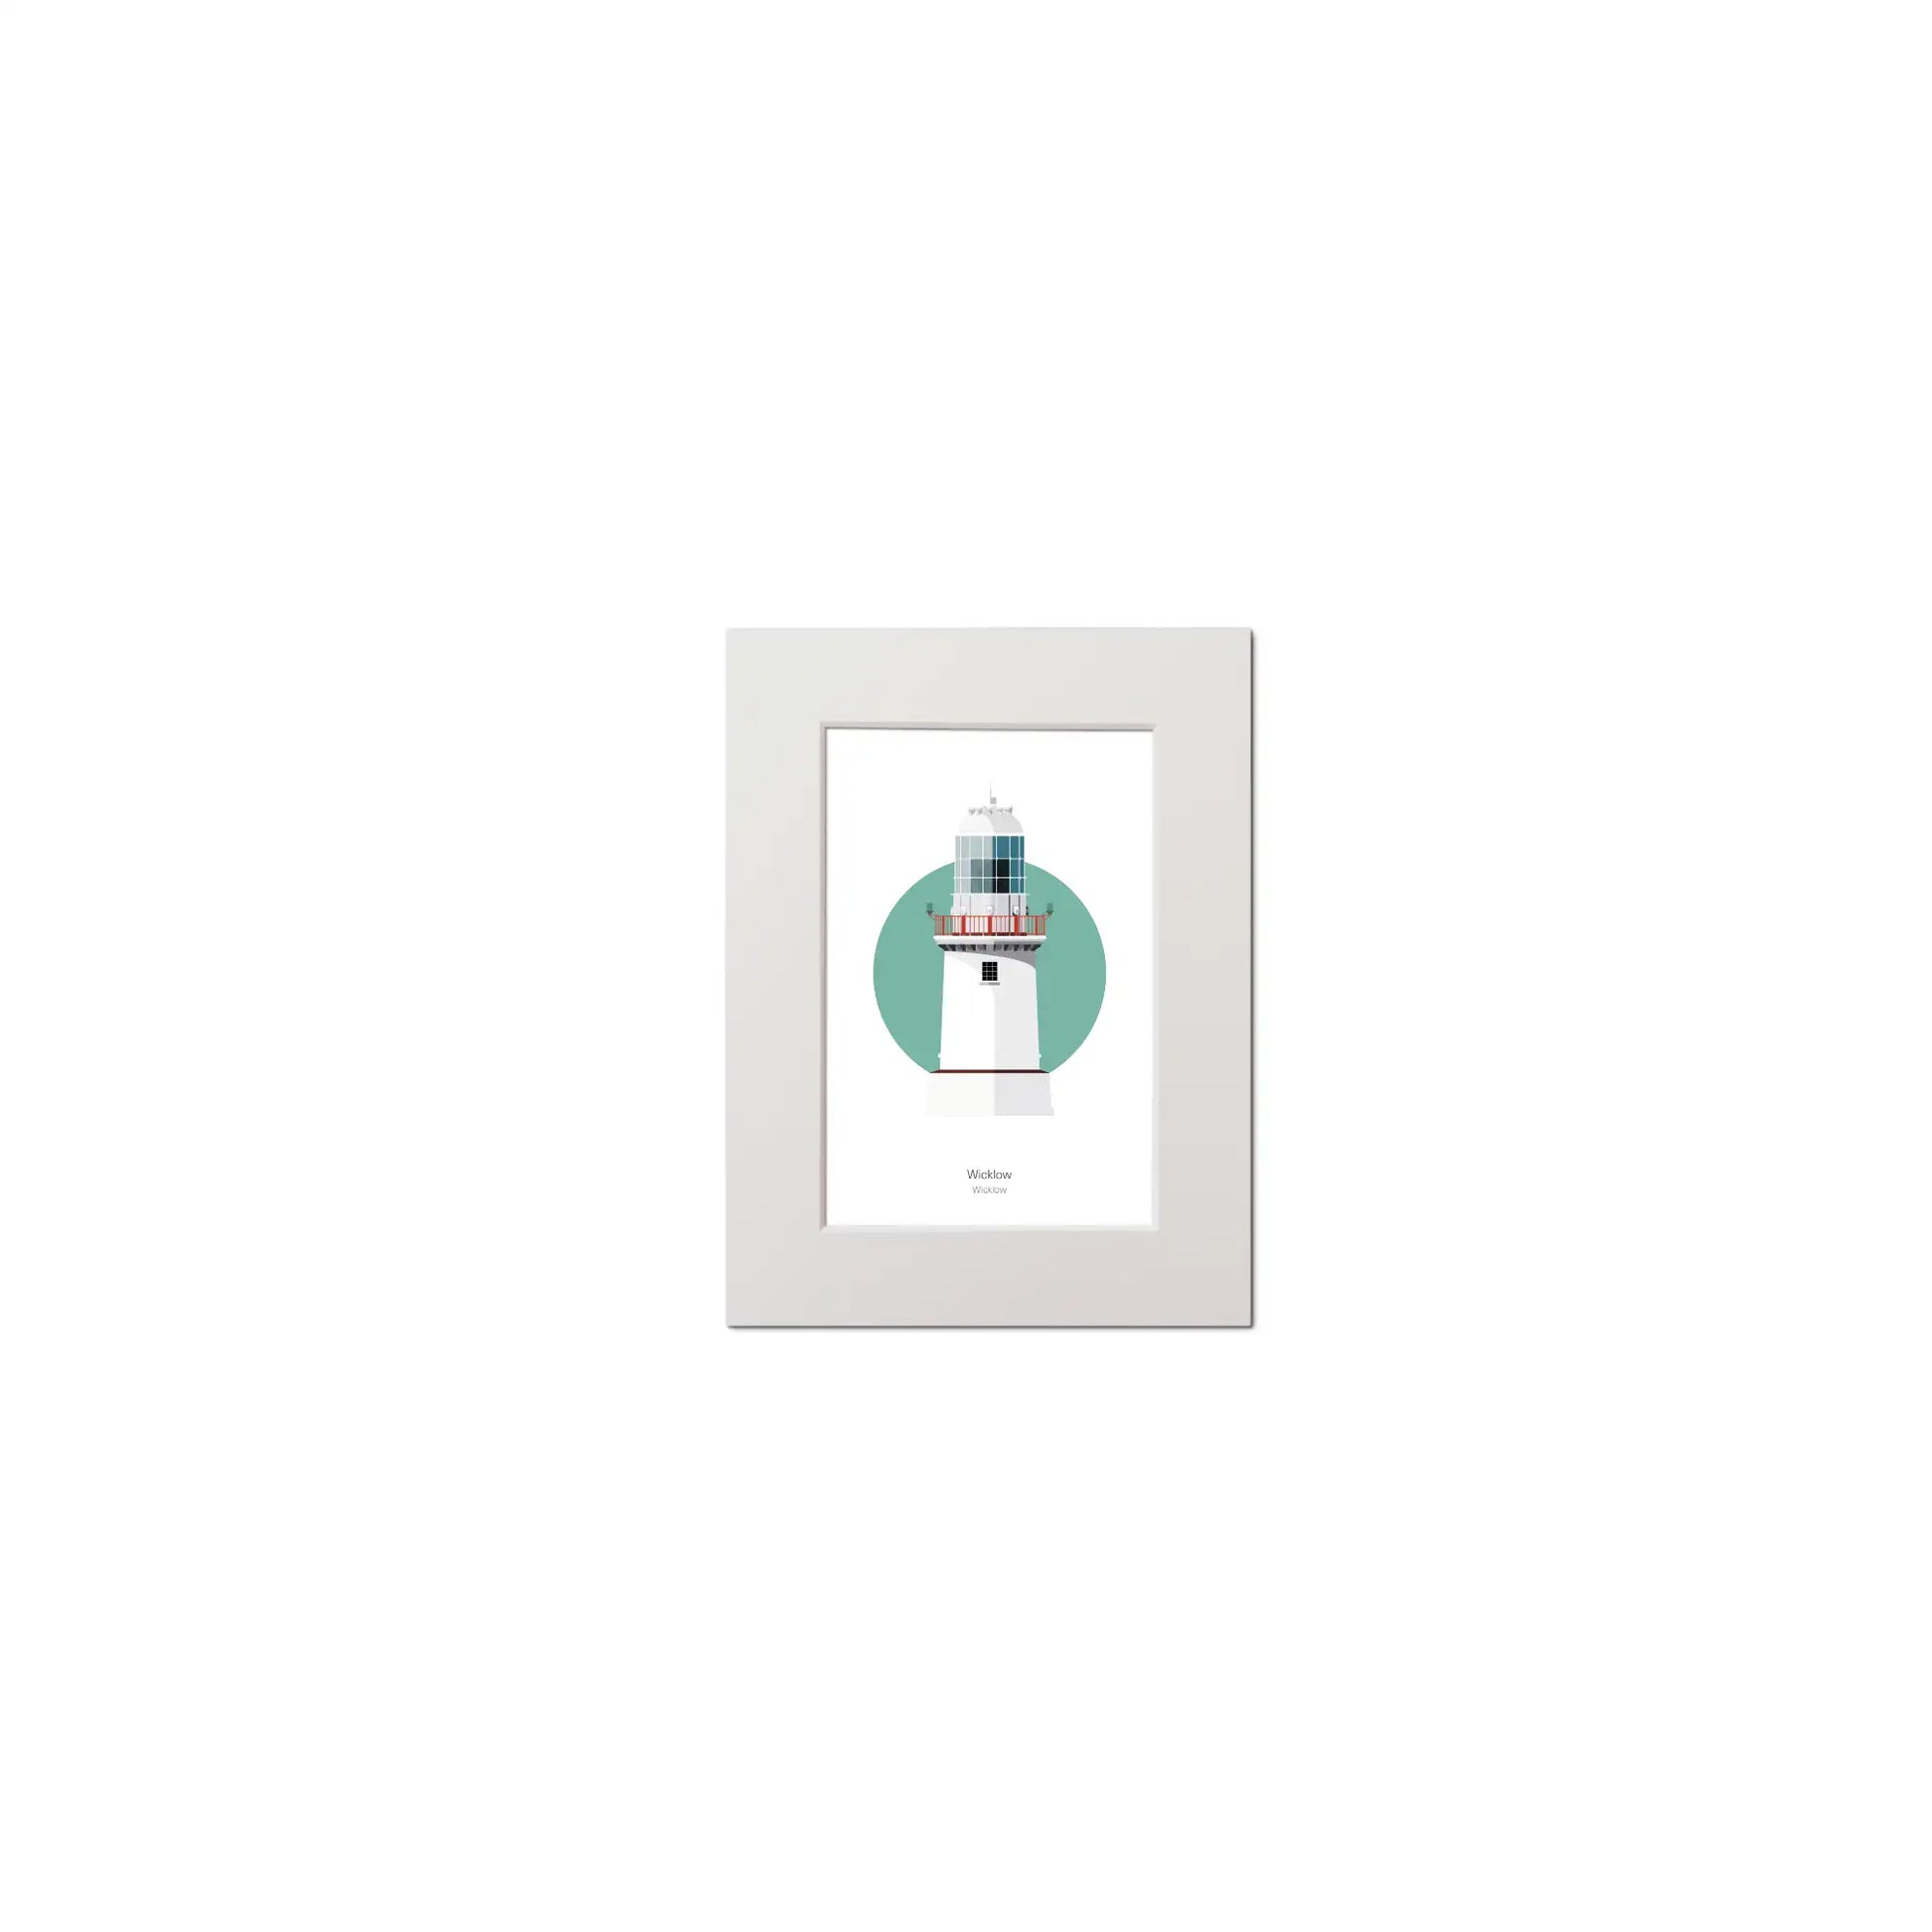 Wall hanging of Wicklow New lighthouse on a white background inside light blue square, mounted and measuring 15x20cm.